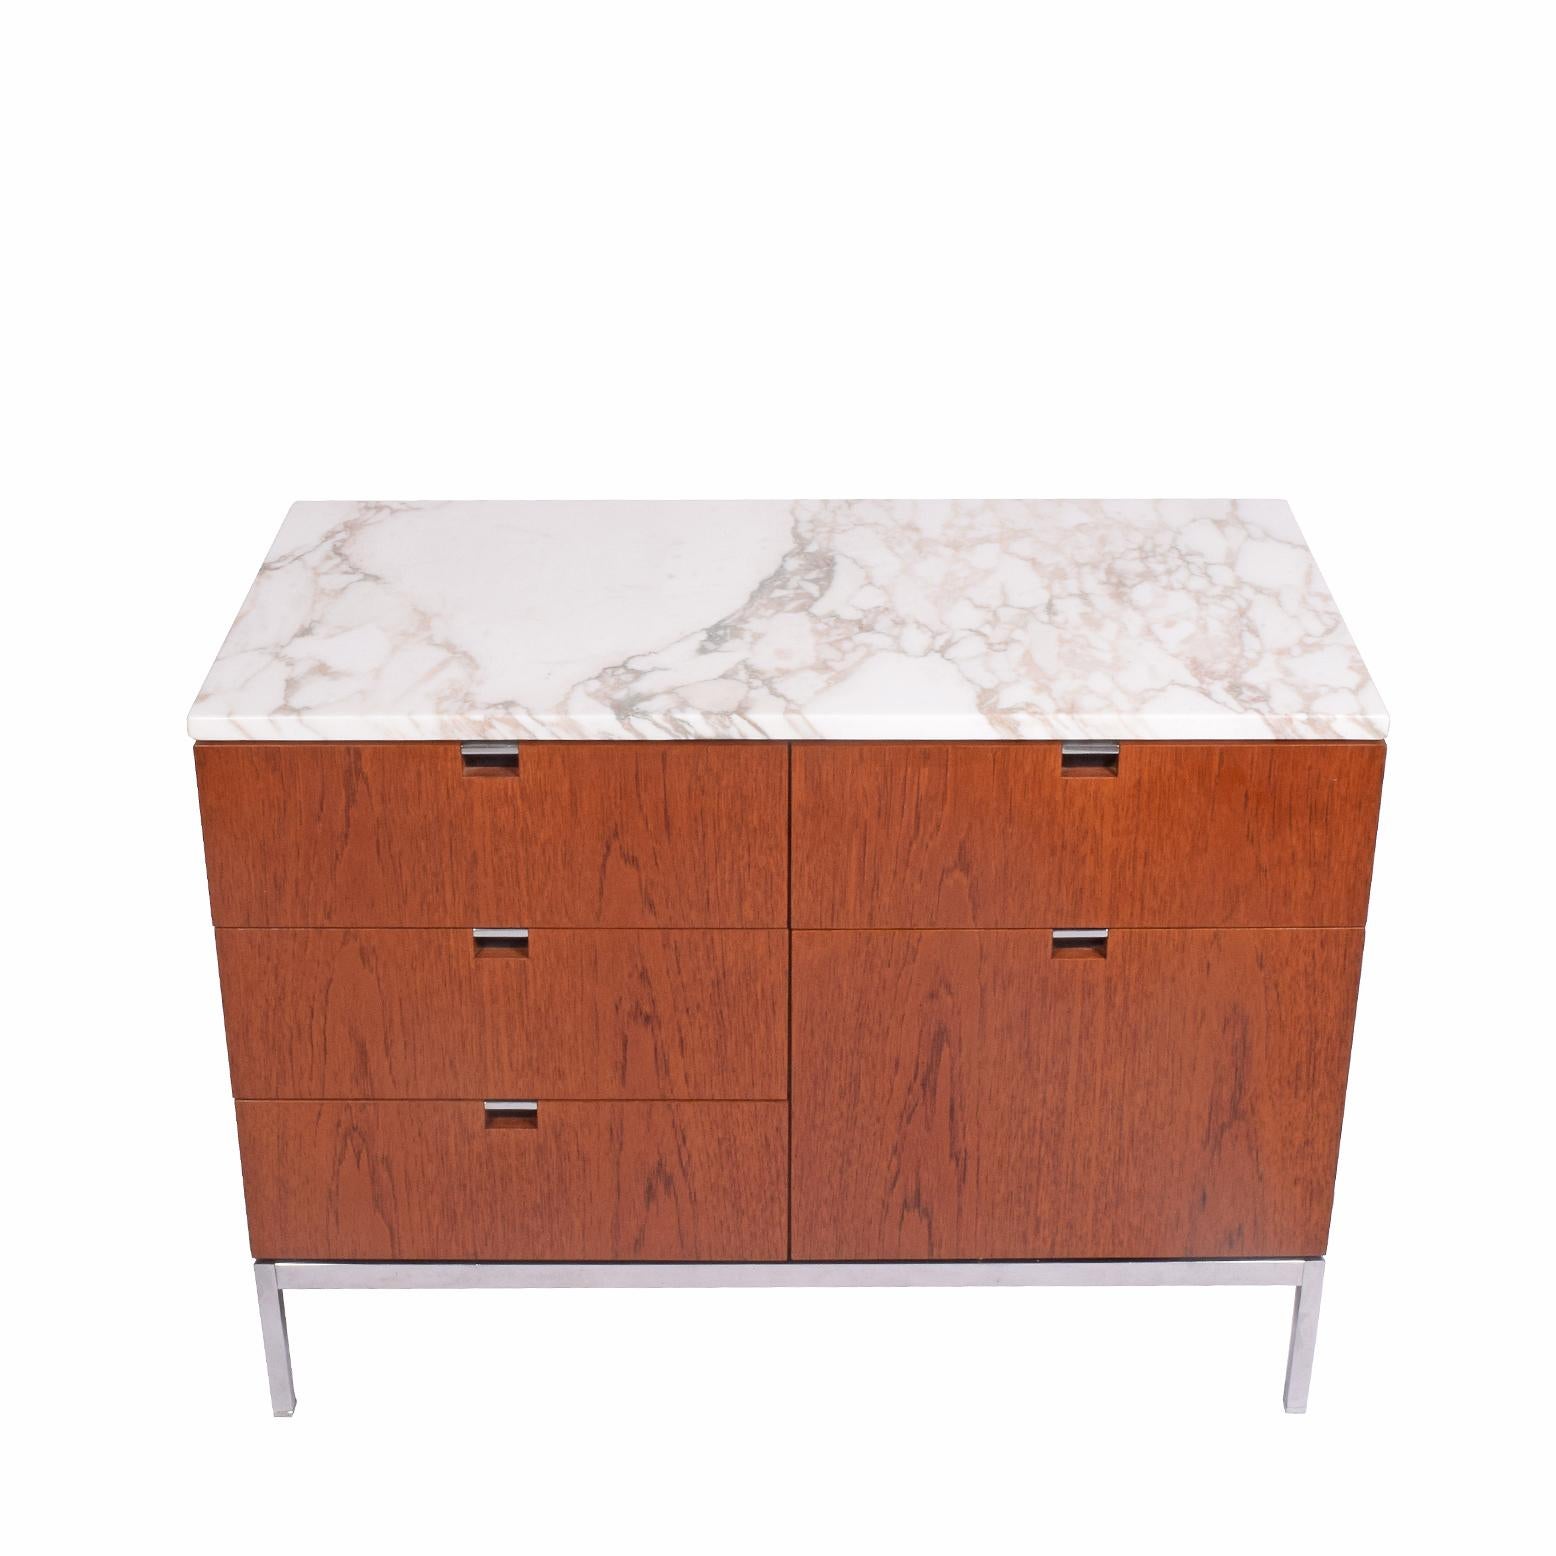 Iconic Florence Knoll design from the executive line, this teak five-drawer chest is freestanding, raised on chrome steel base. Dated 1972. Model 2542M.